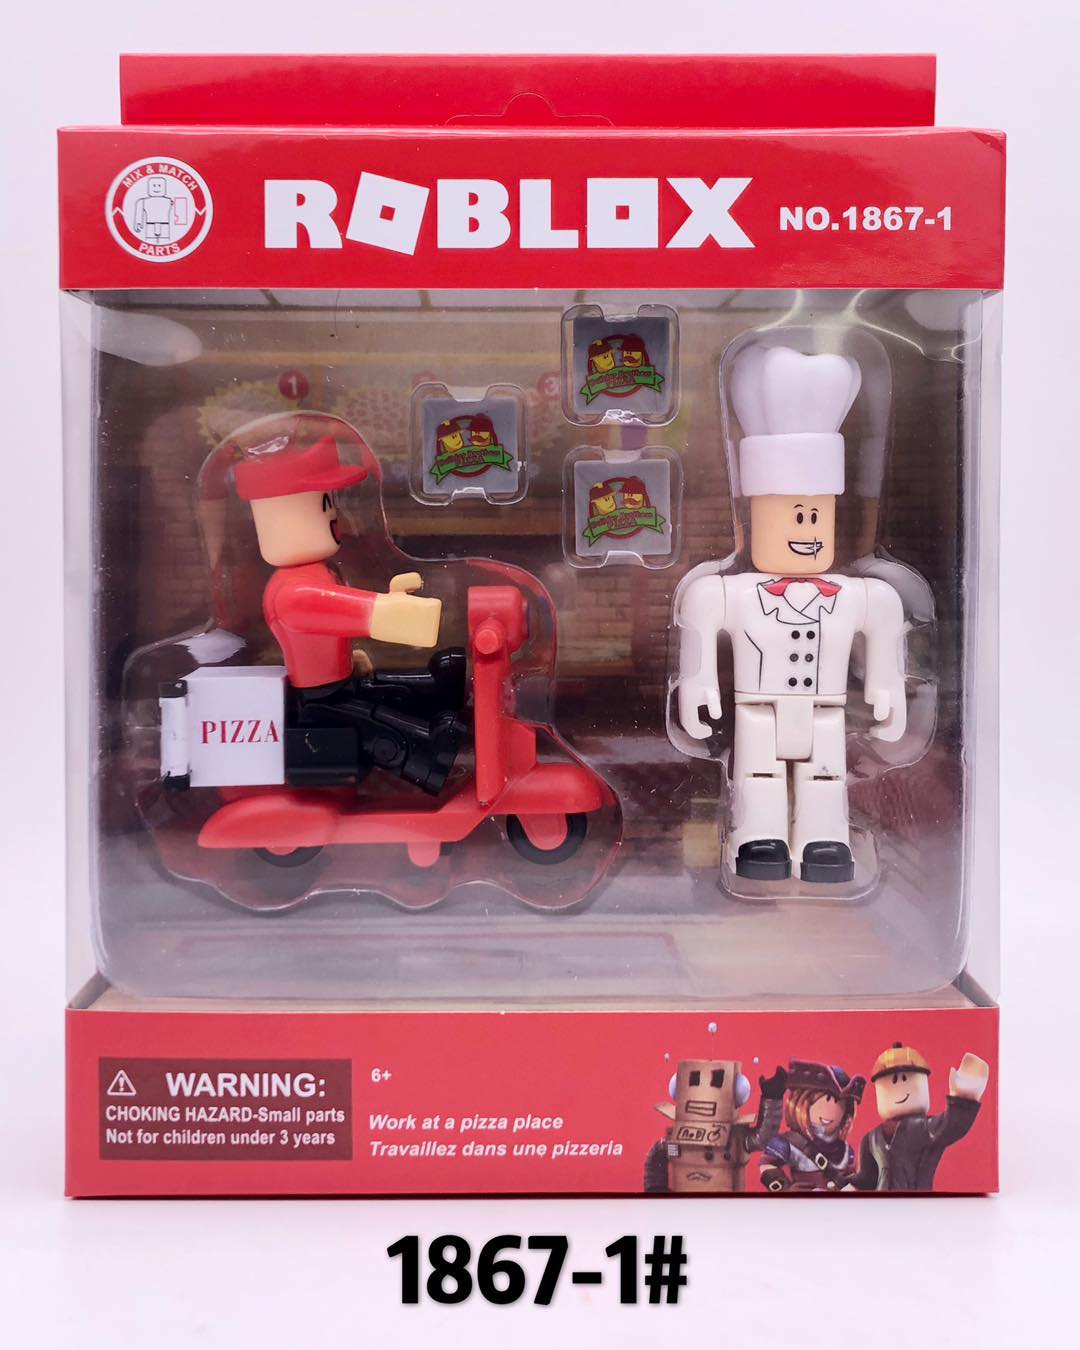 Buy Mini Figures At Best Price Online Lazada Com Ph - roblox work at a pizza toy figure set shopee philippines